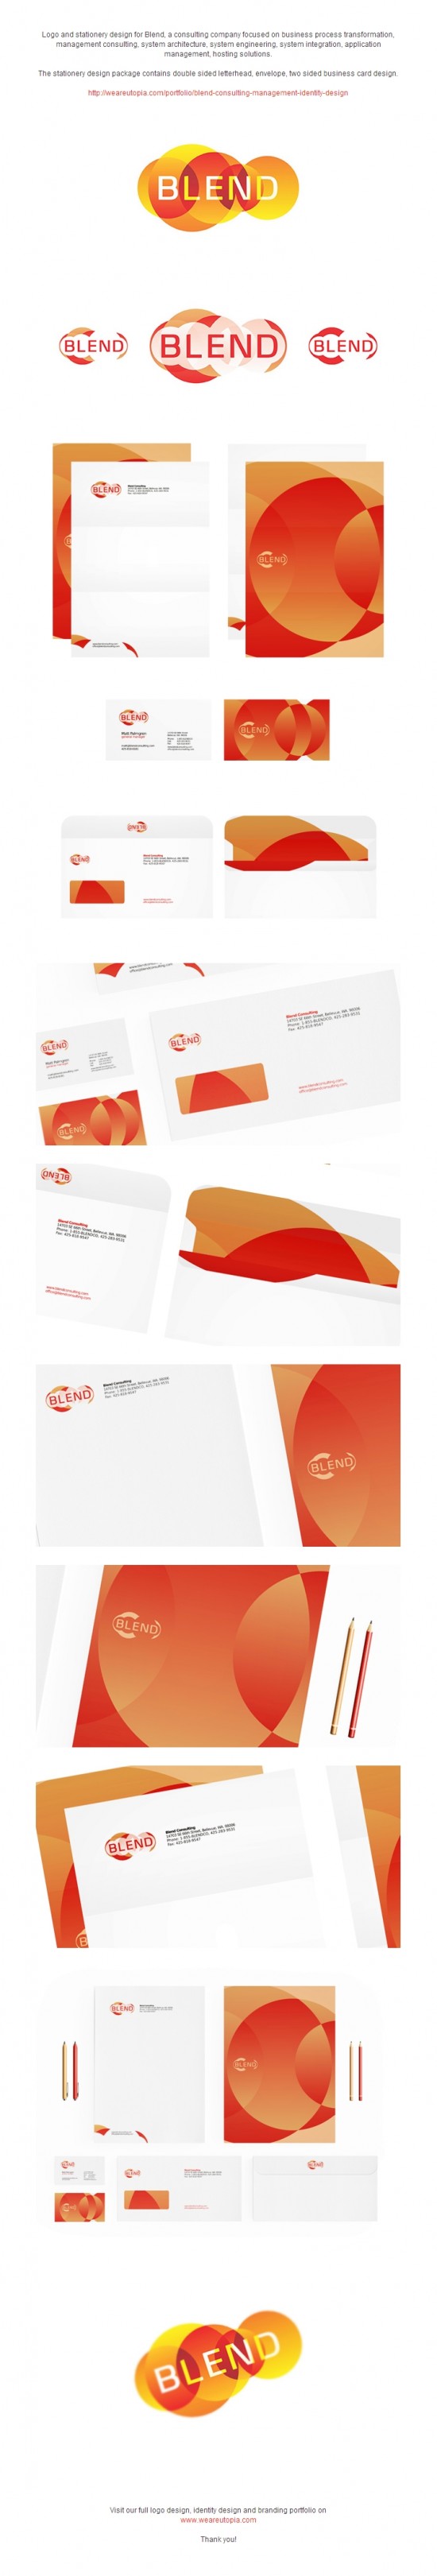 Blend logo and corporate identity design by Utopia Branding Agency